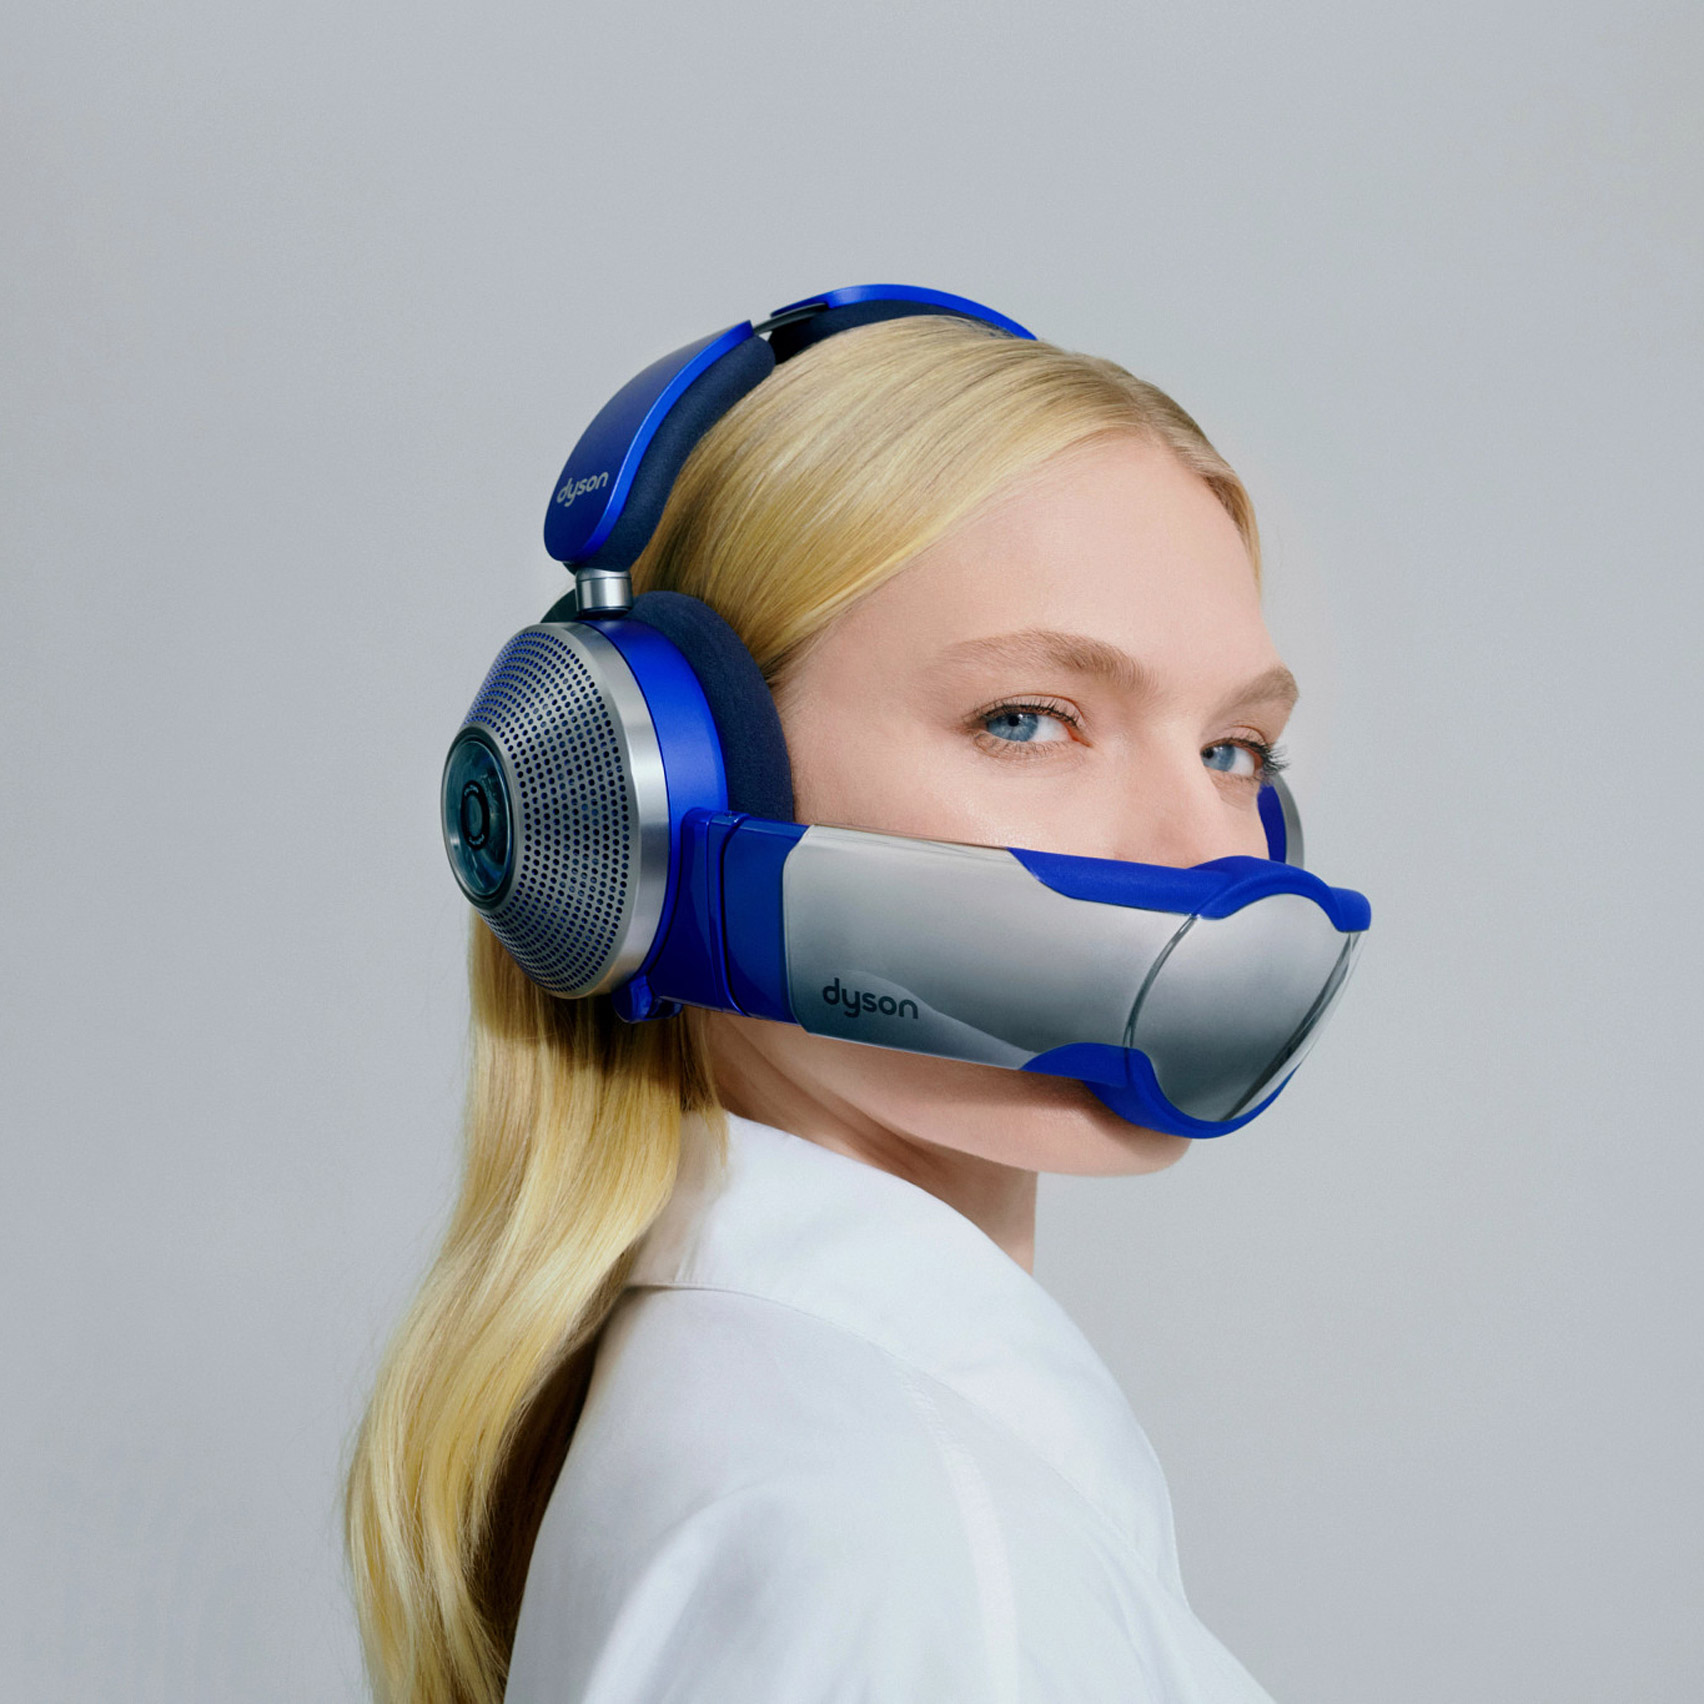 Dyson Zone Review: We Test the $1,000 Air-Purifying Headphones - CNET